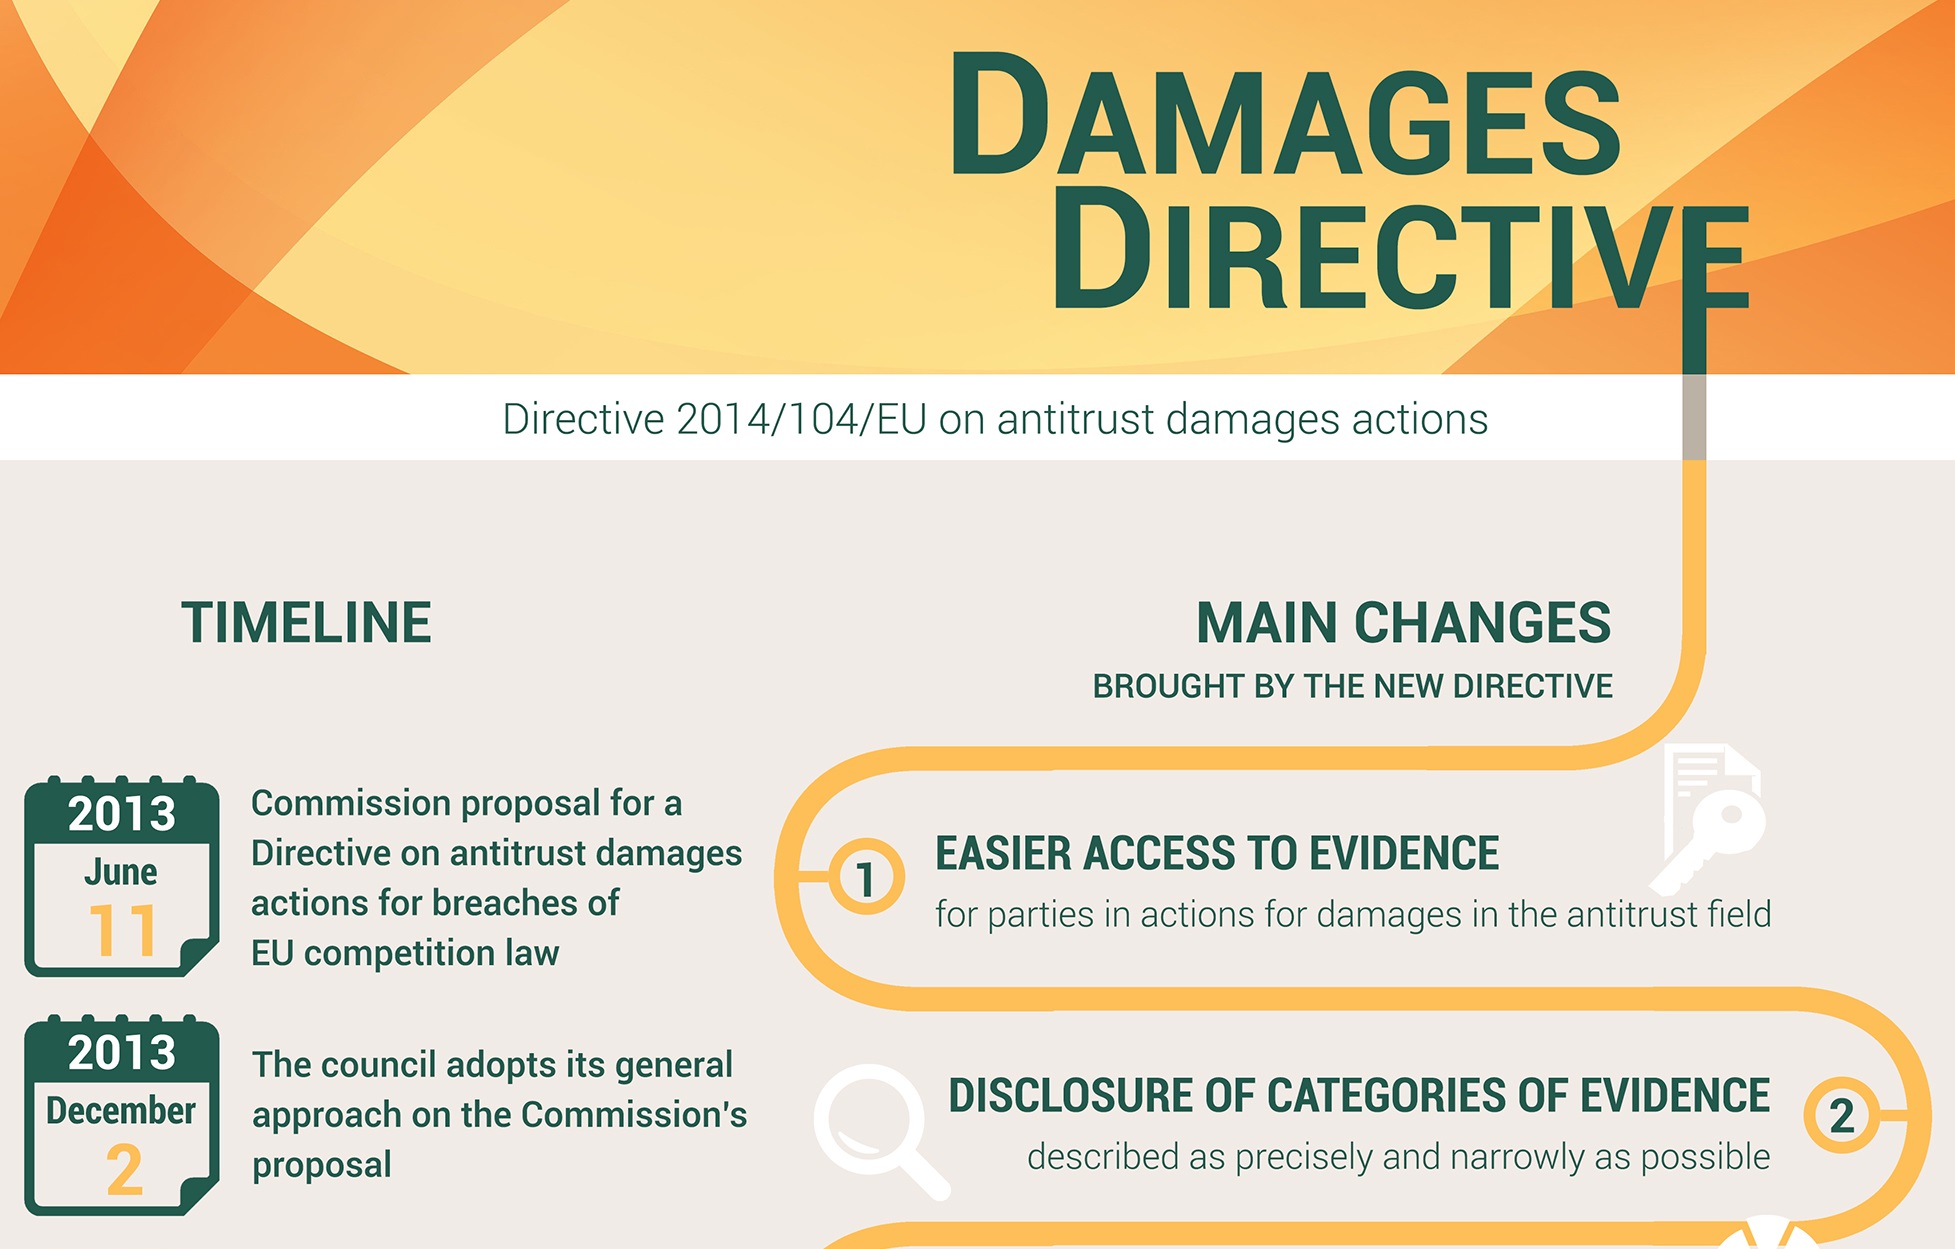 The history of the Damages
Directive